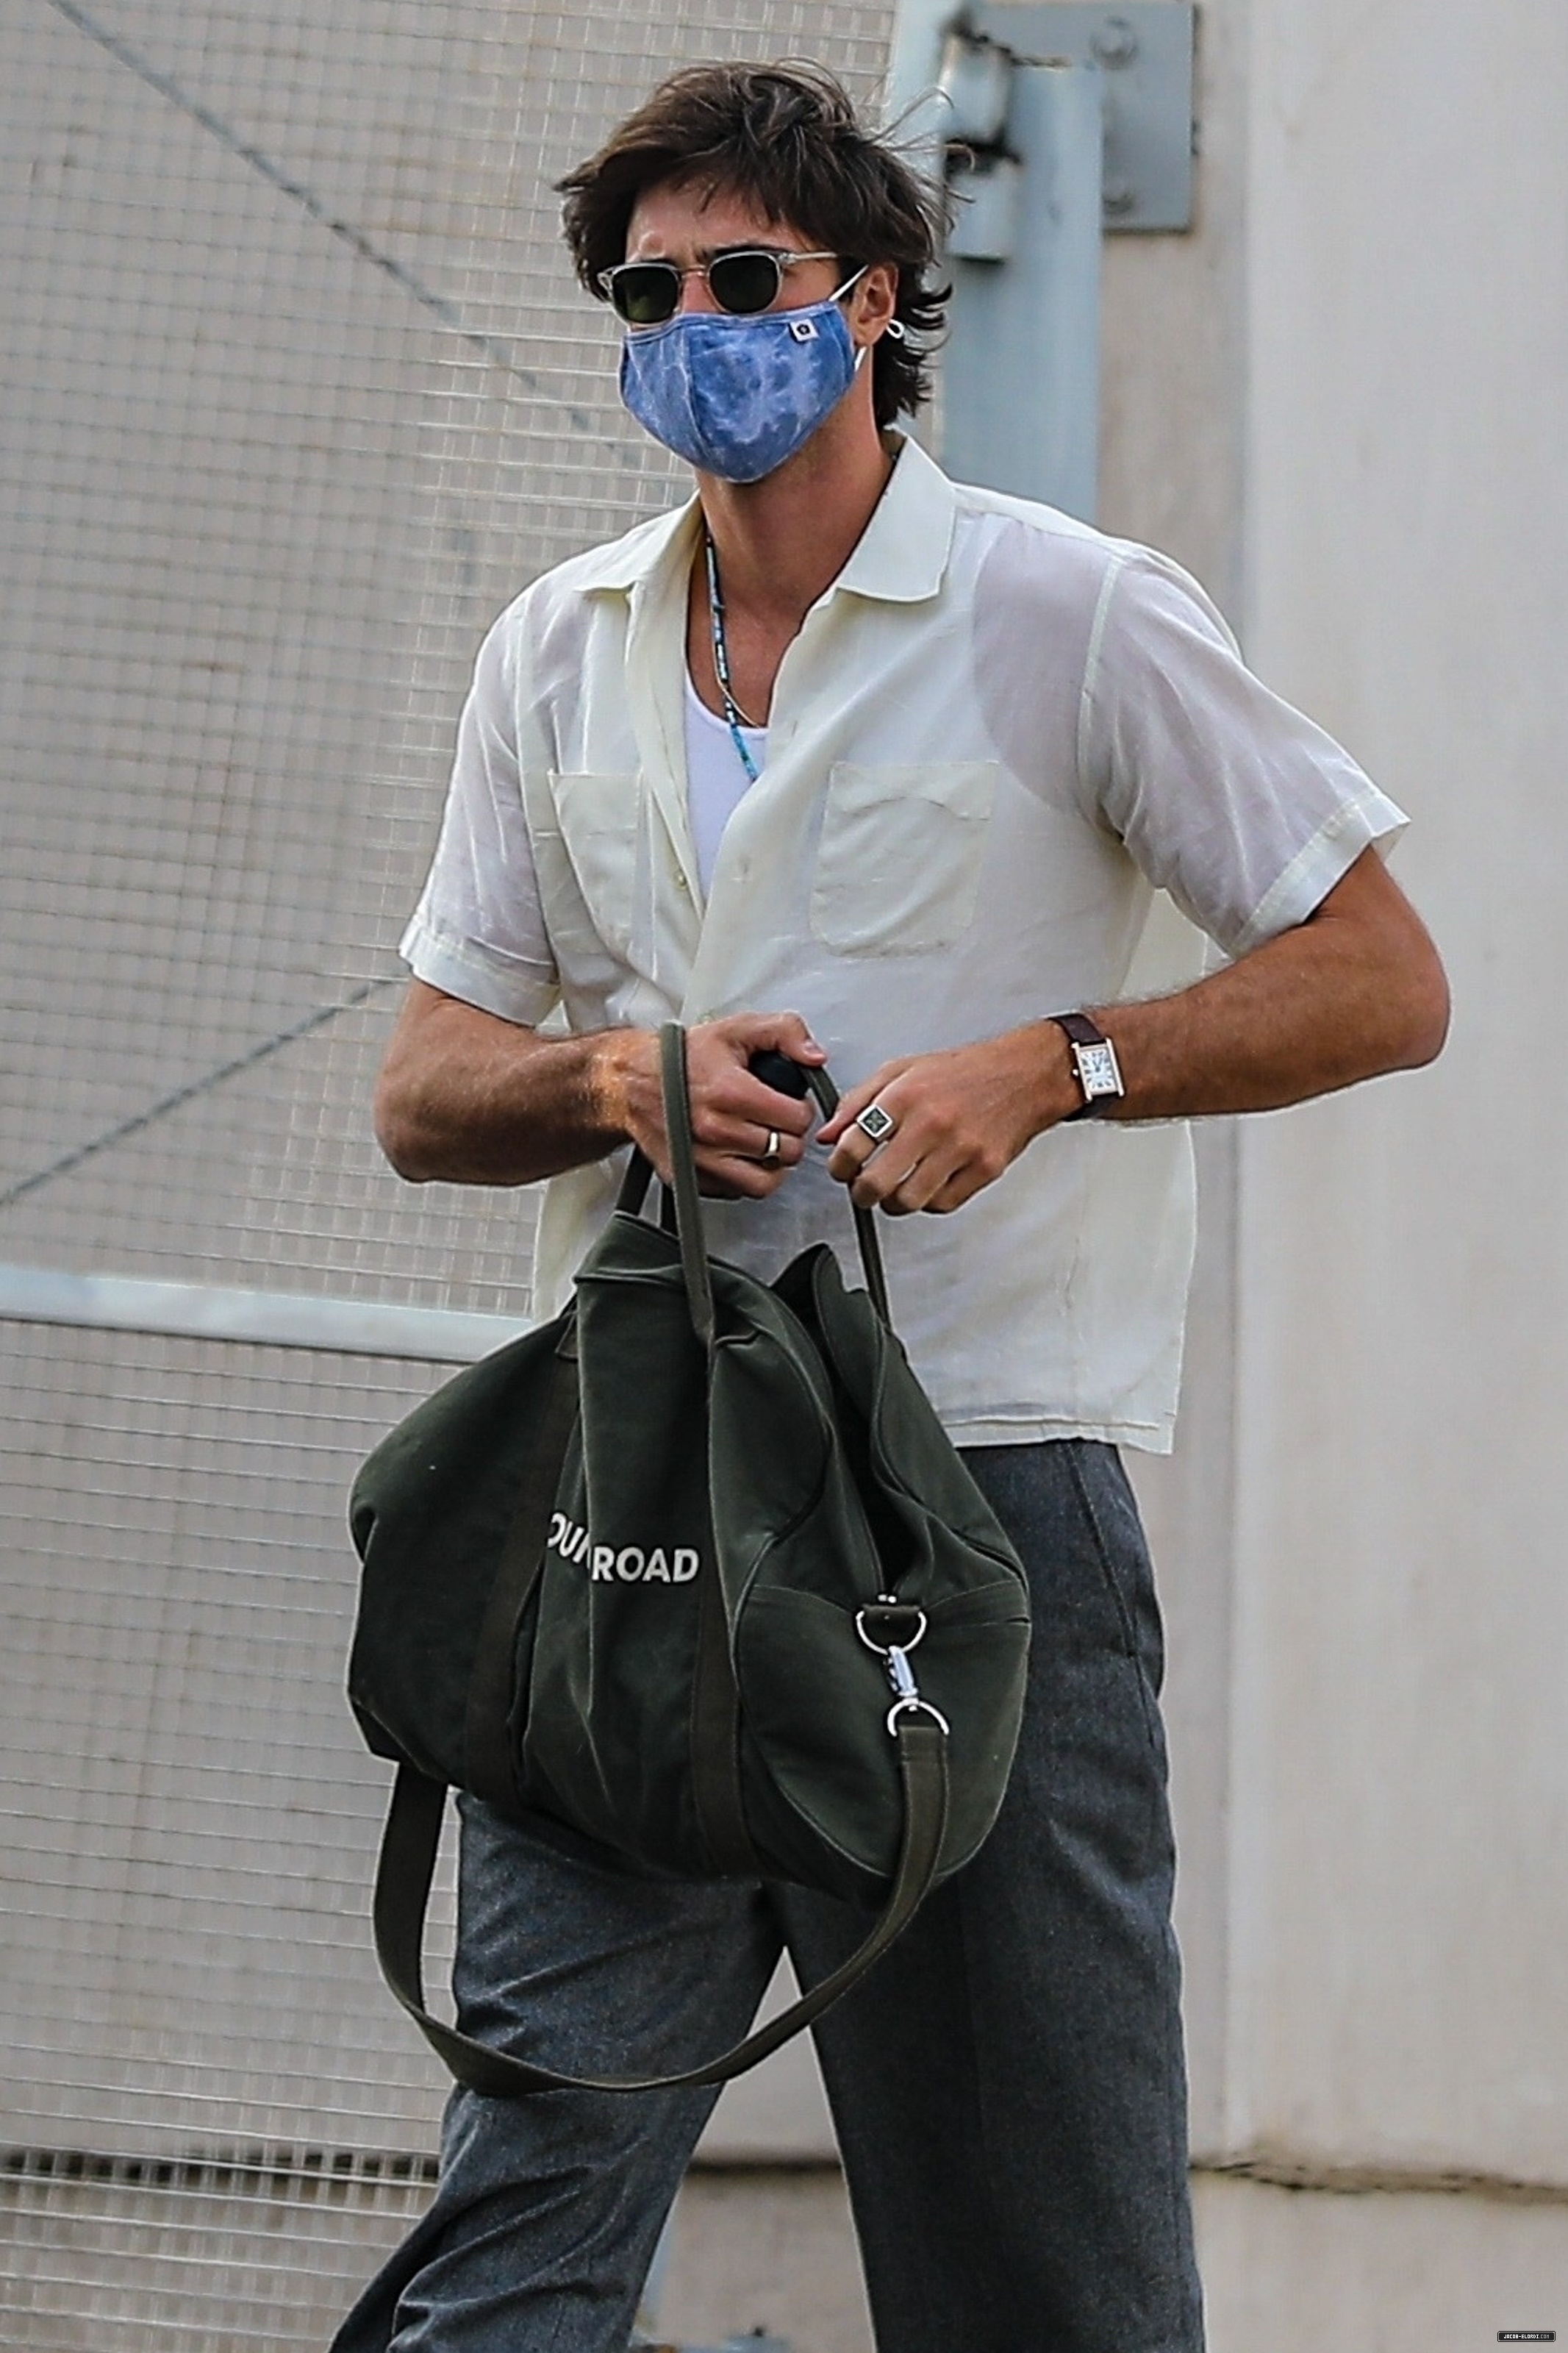 Man in casual shirt and pants with a mask, holding sunglasses and a duffle bag, walking outside